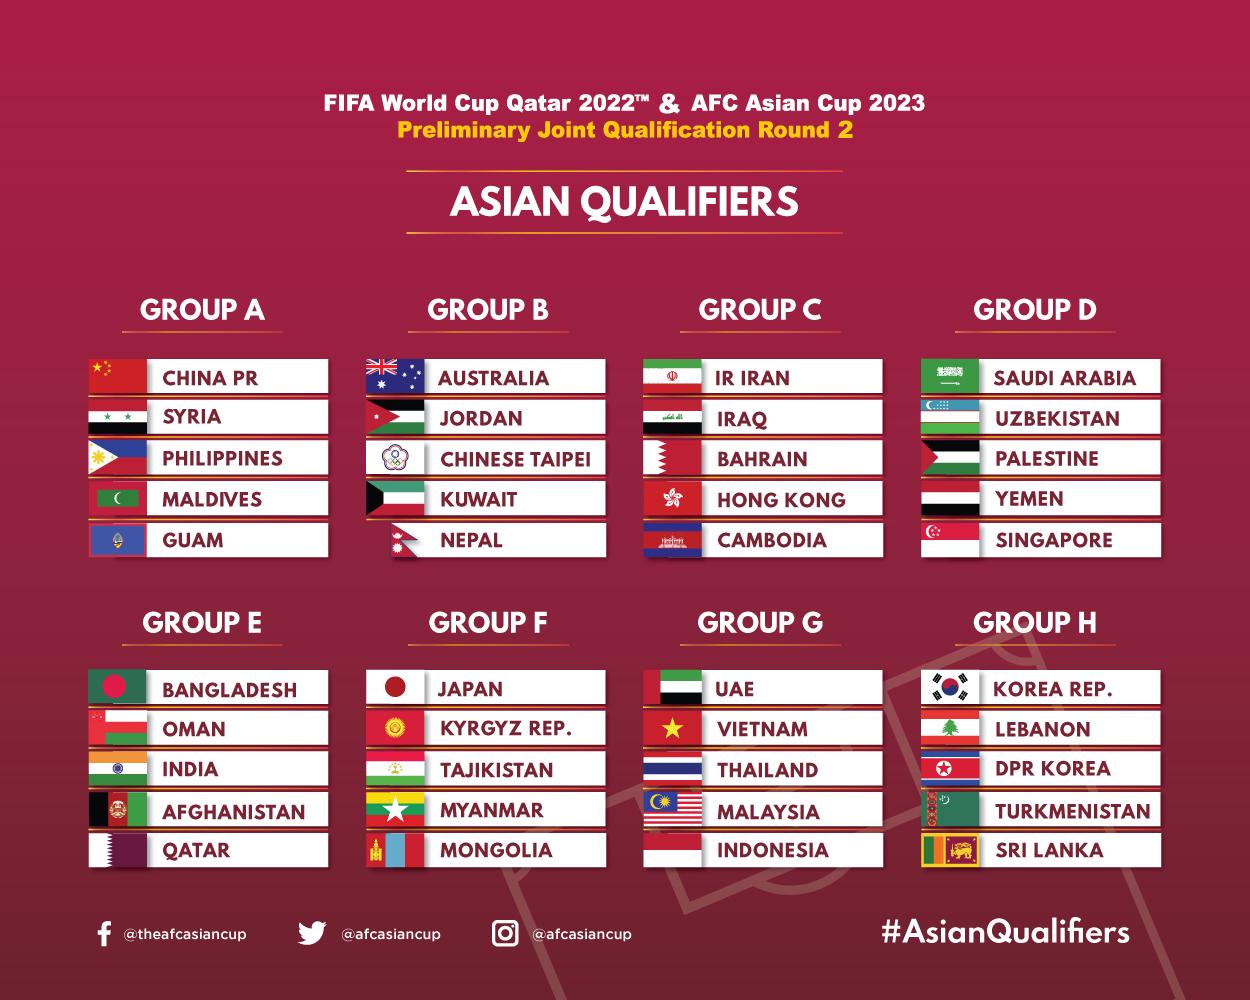 Palestine drawn in Group D for 2022 World Cup qualifiers